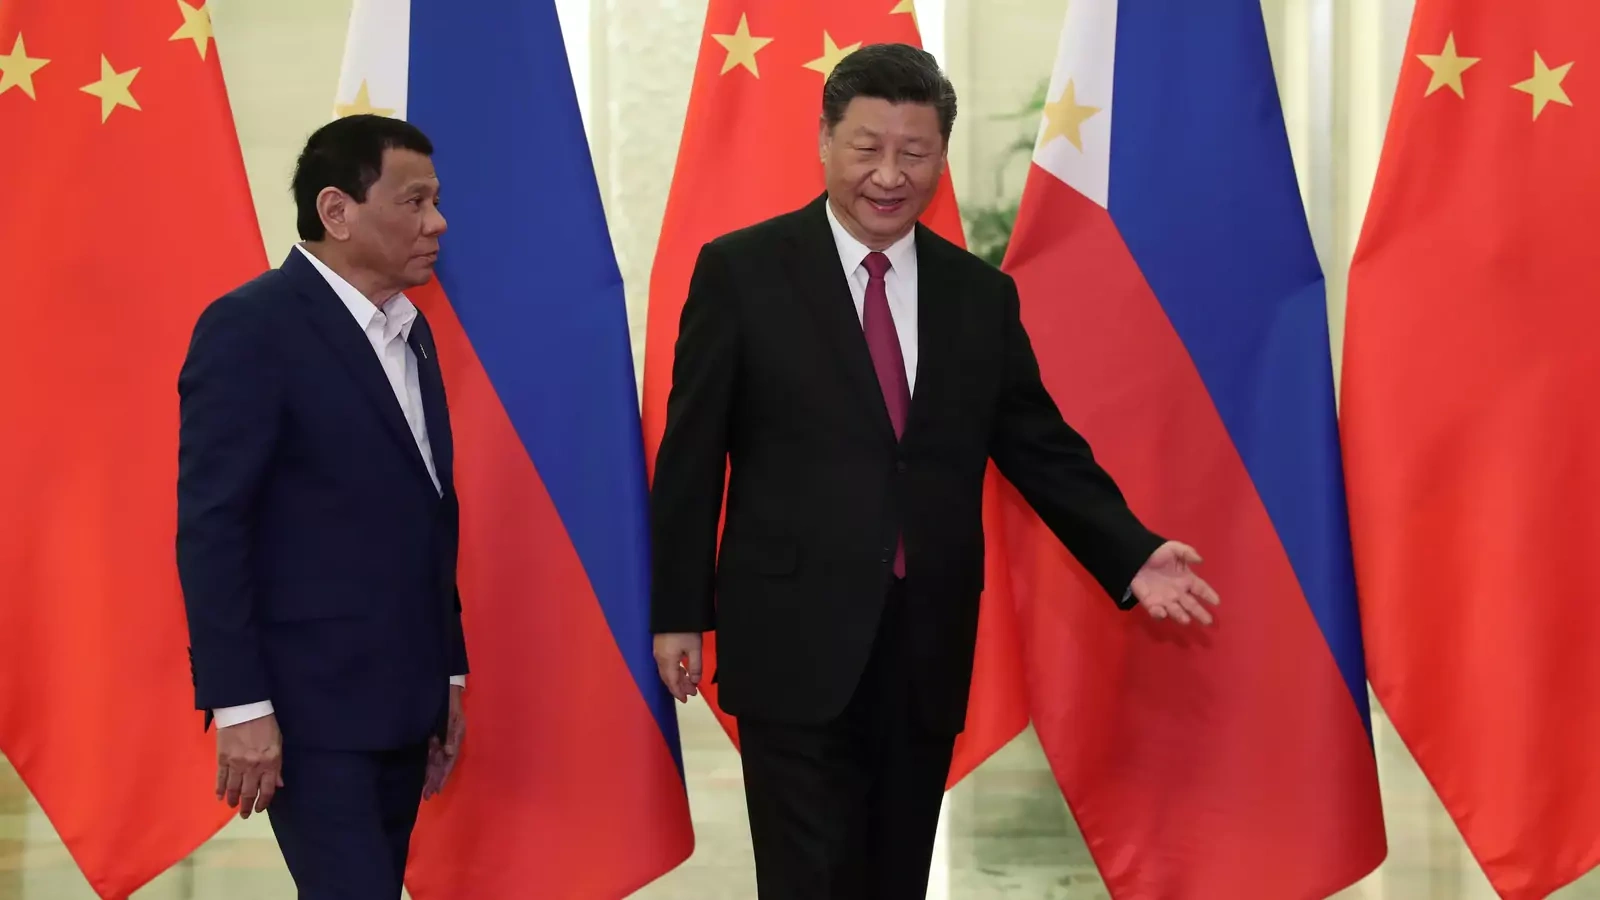 Philippine President Rodrigo Duterte and Chinese President Xi Jinping walk to a meeting at the Great Hall of People in Beijing, China, on on April 25, 2019.